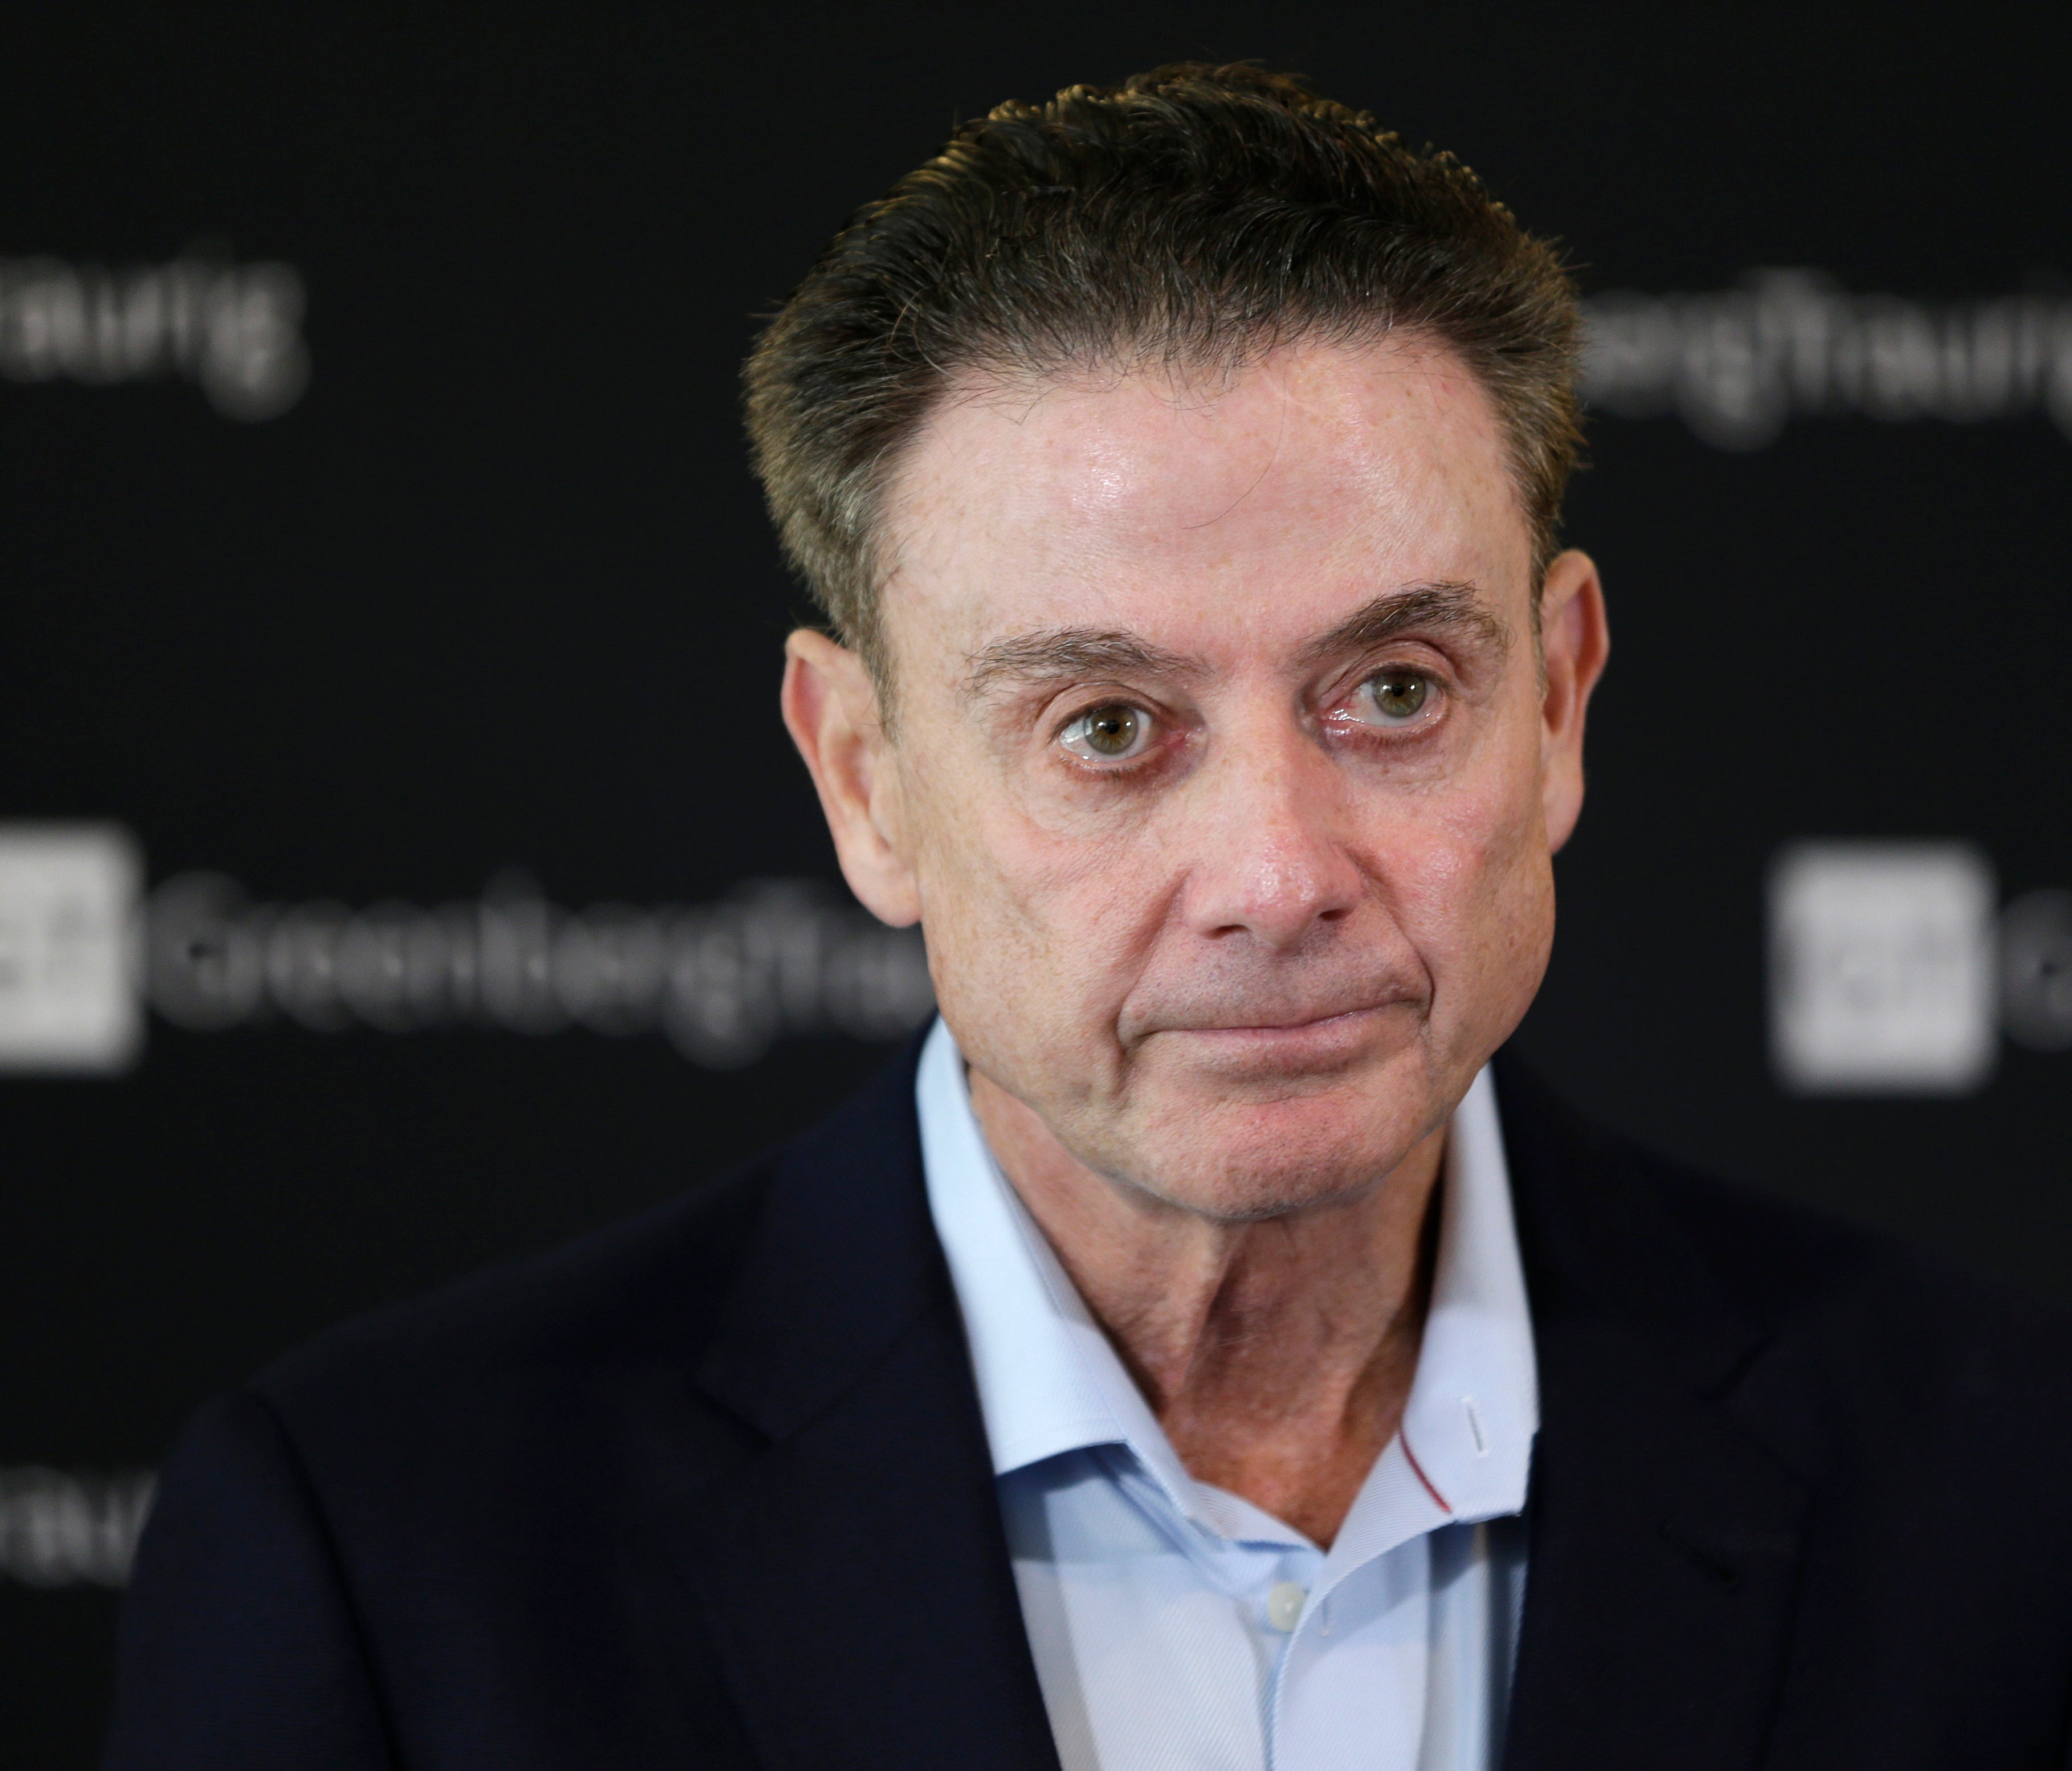 Former Louisville basketball coach Rick Pitino talks to reporters during a news conference in New York, Wednesday, Feb. 21, 2018. Pitino held the news conference in the wake of an NCAA decision in a sex scandal case that strips the Cardinals program 